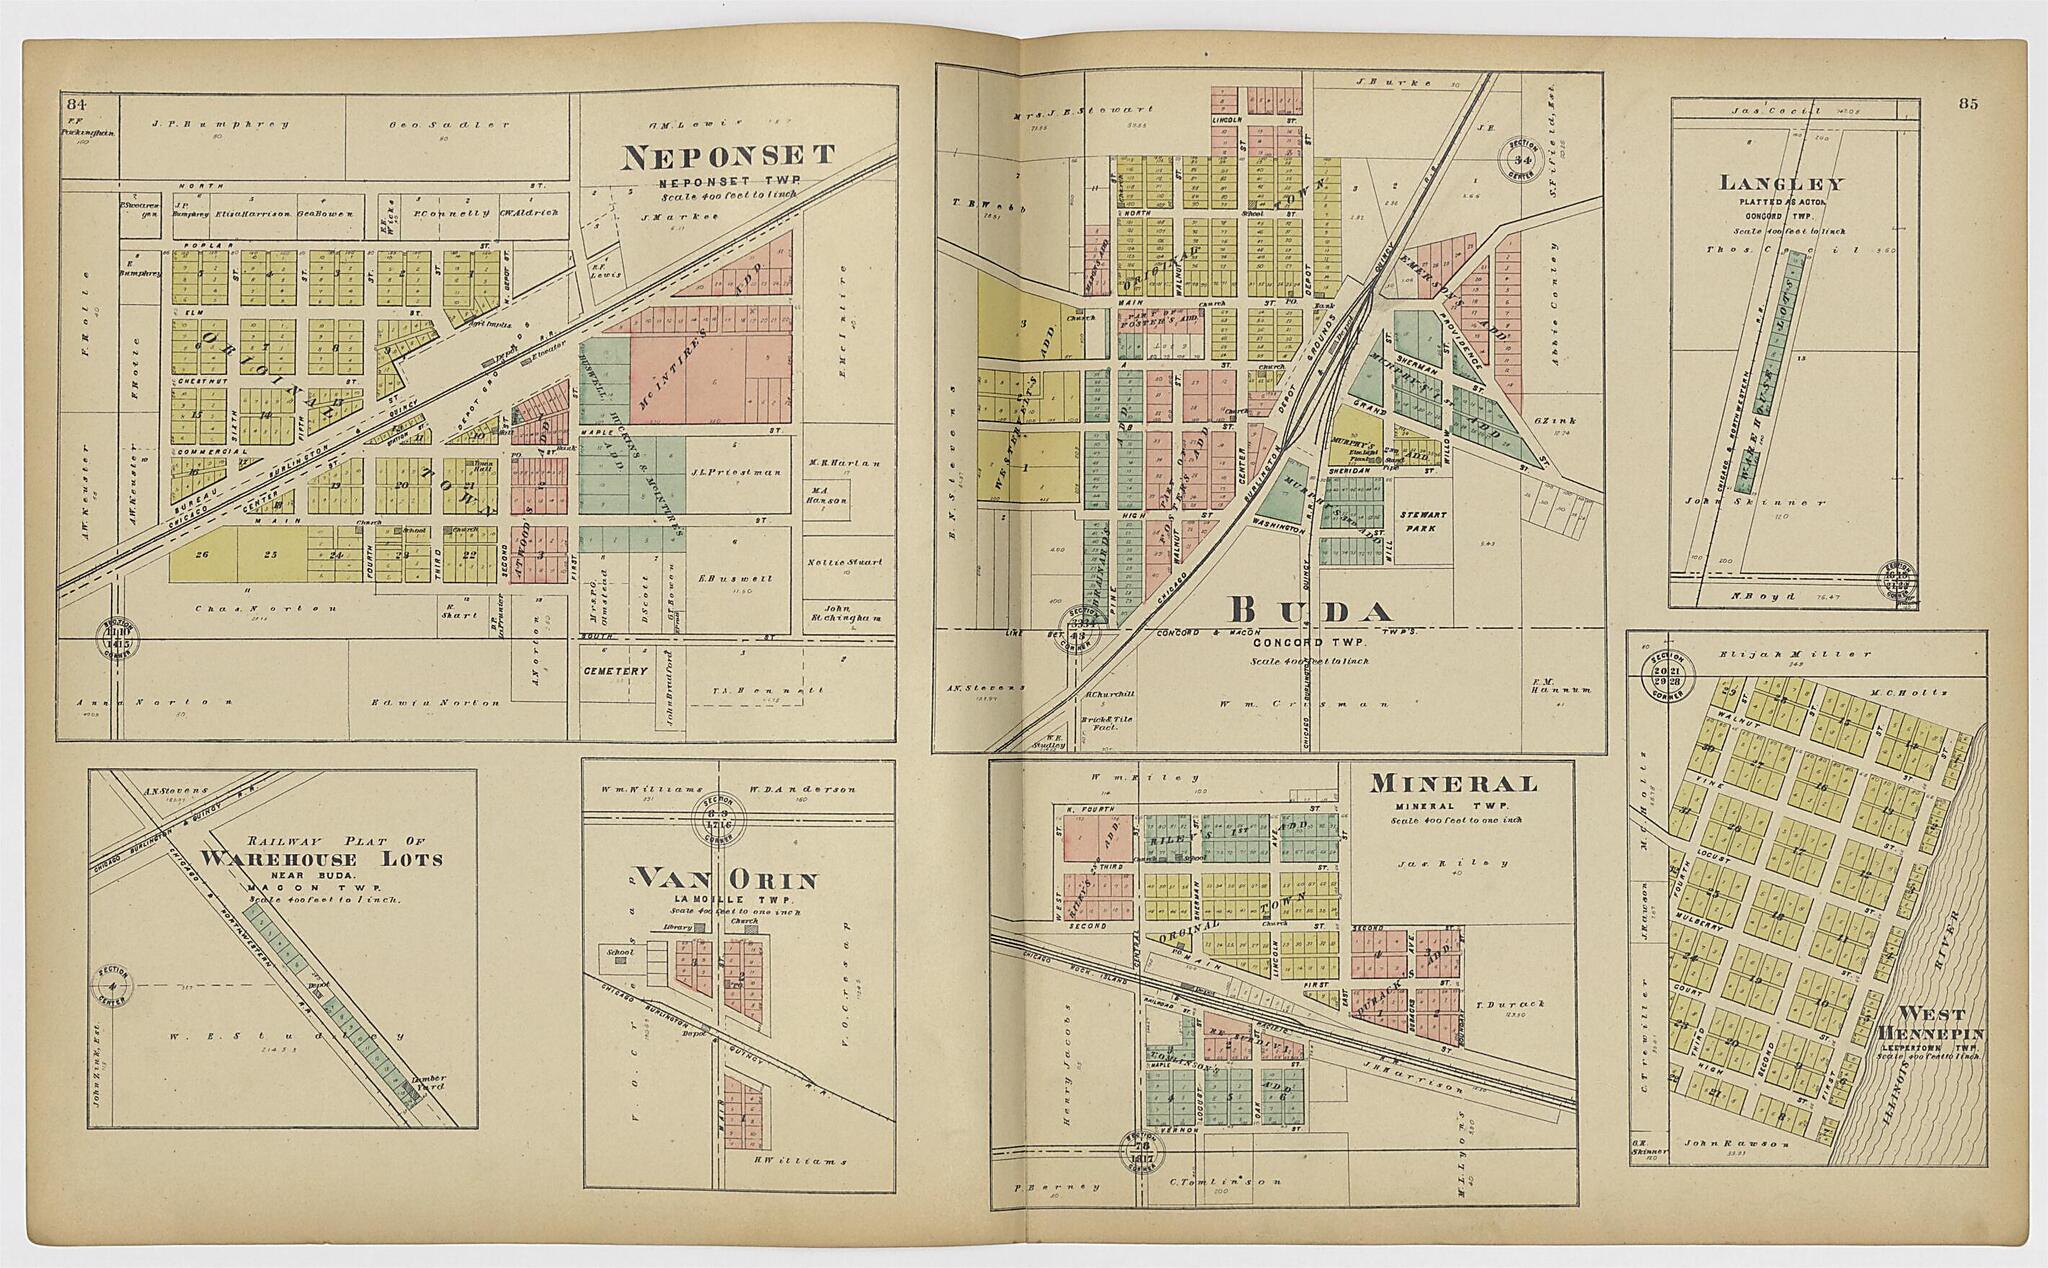 This old map of Image 40 of 20th Century Atlas of Bureau County, Illinois from Atlas of Bureau County, Illinois from 1905 was created by  Middle-West Publishing Co in 1905